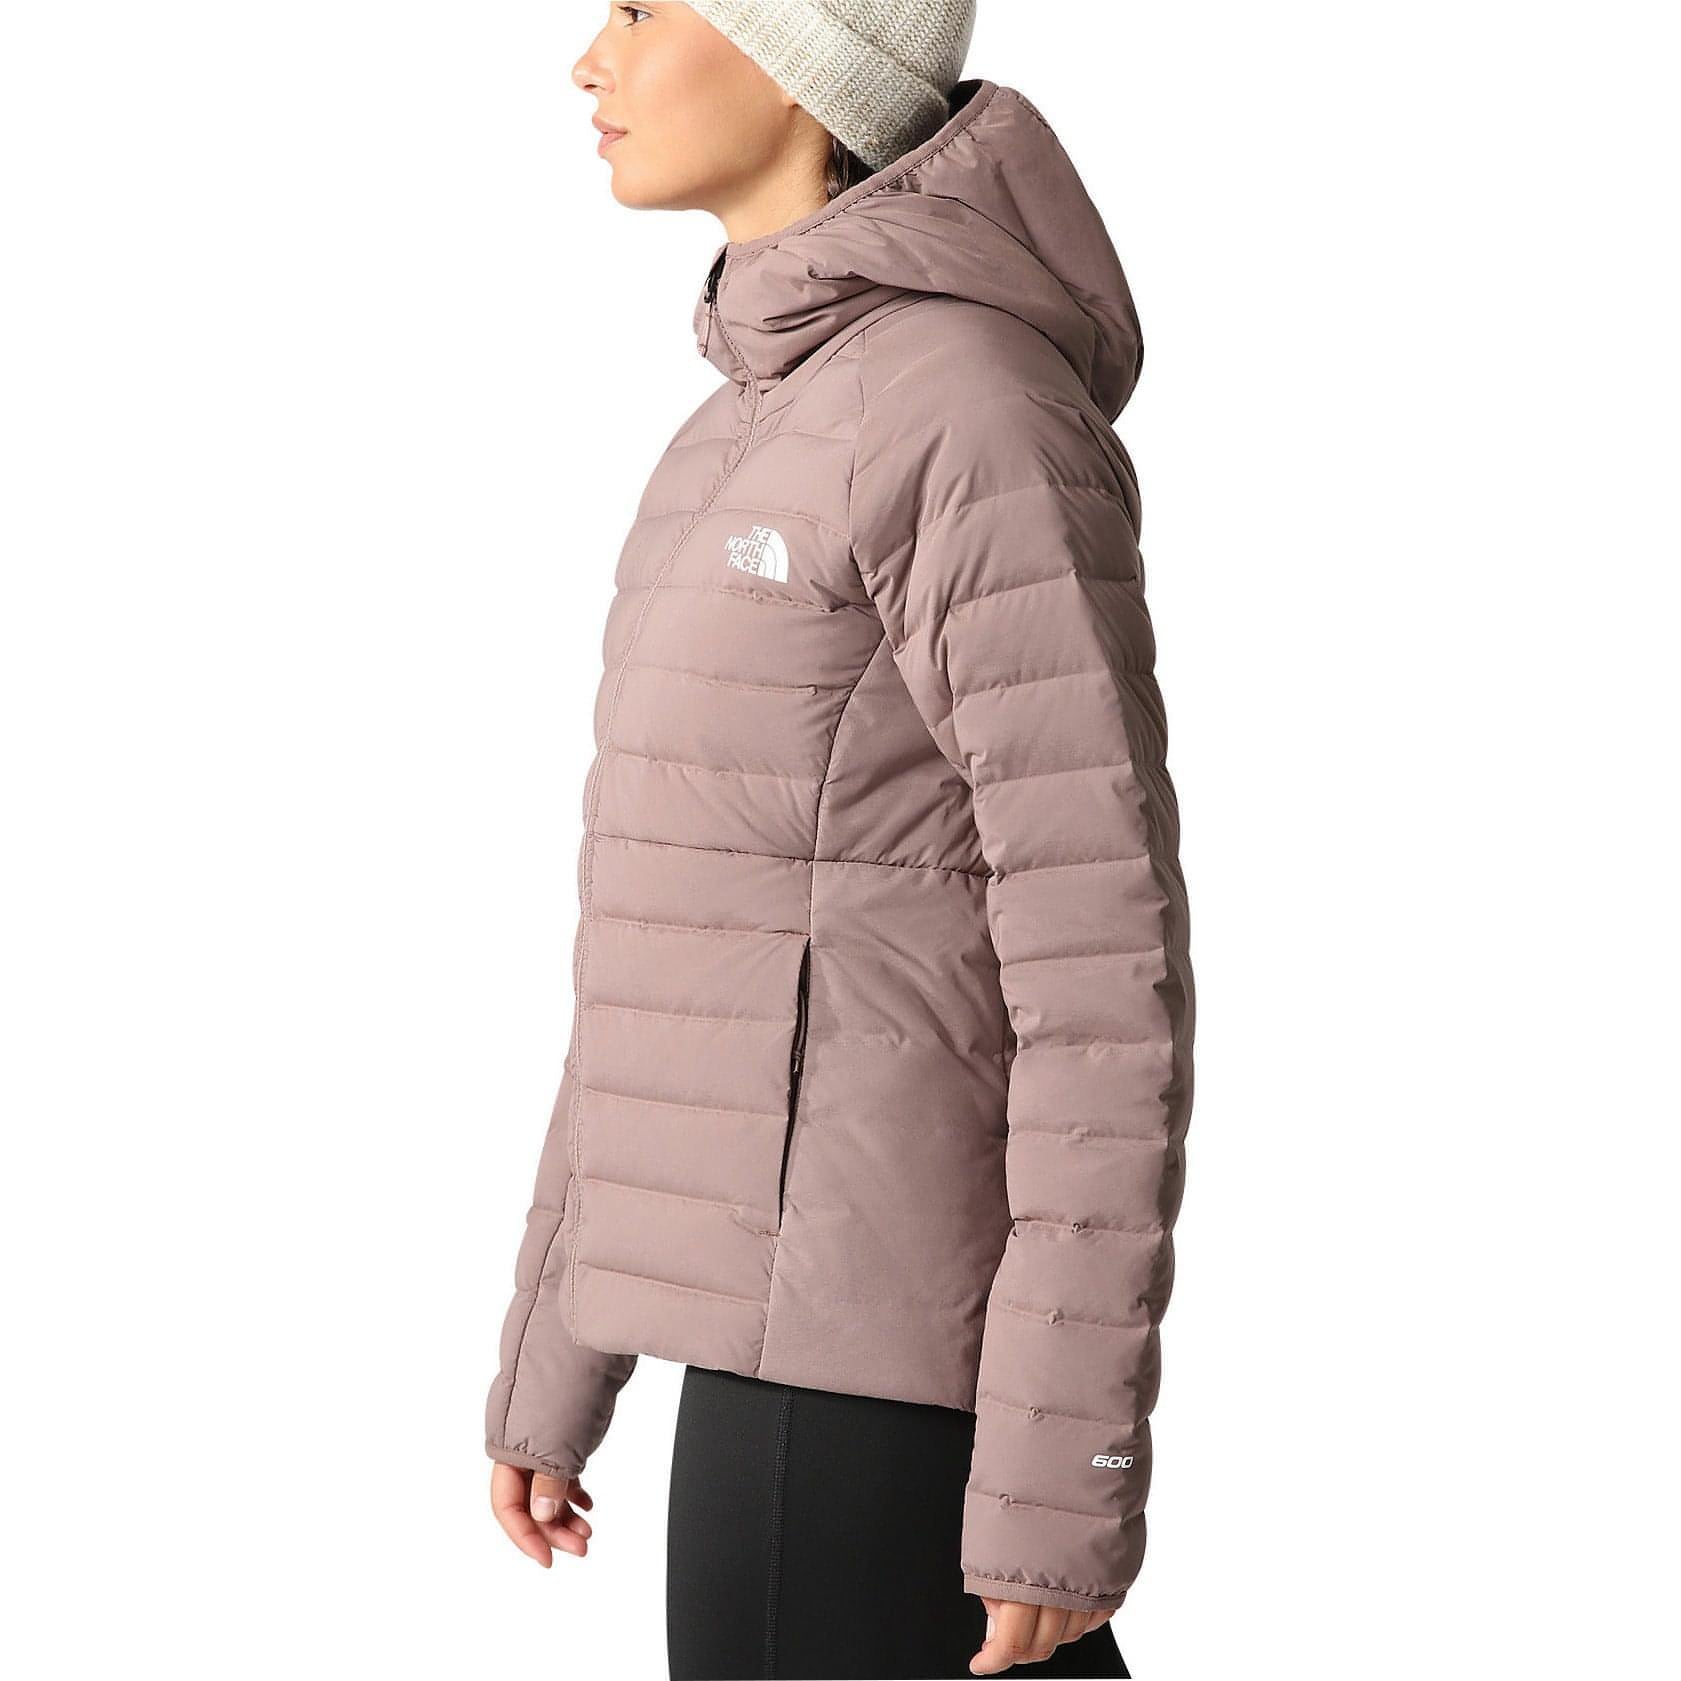 The North Face Belleview Stretch Down Jacket Nf0A7Uk5Efu1 Side - Side View